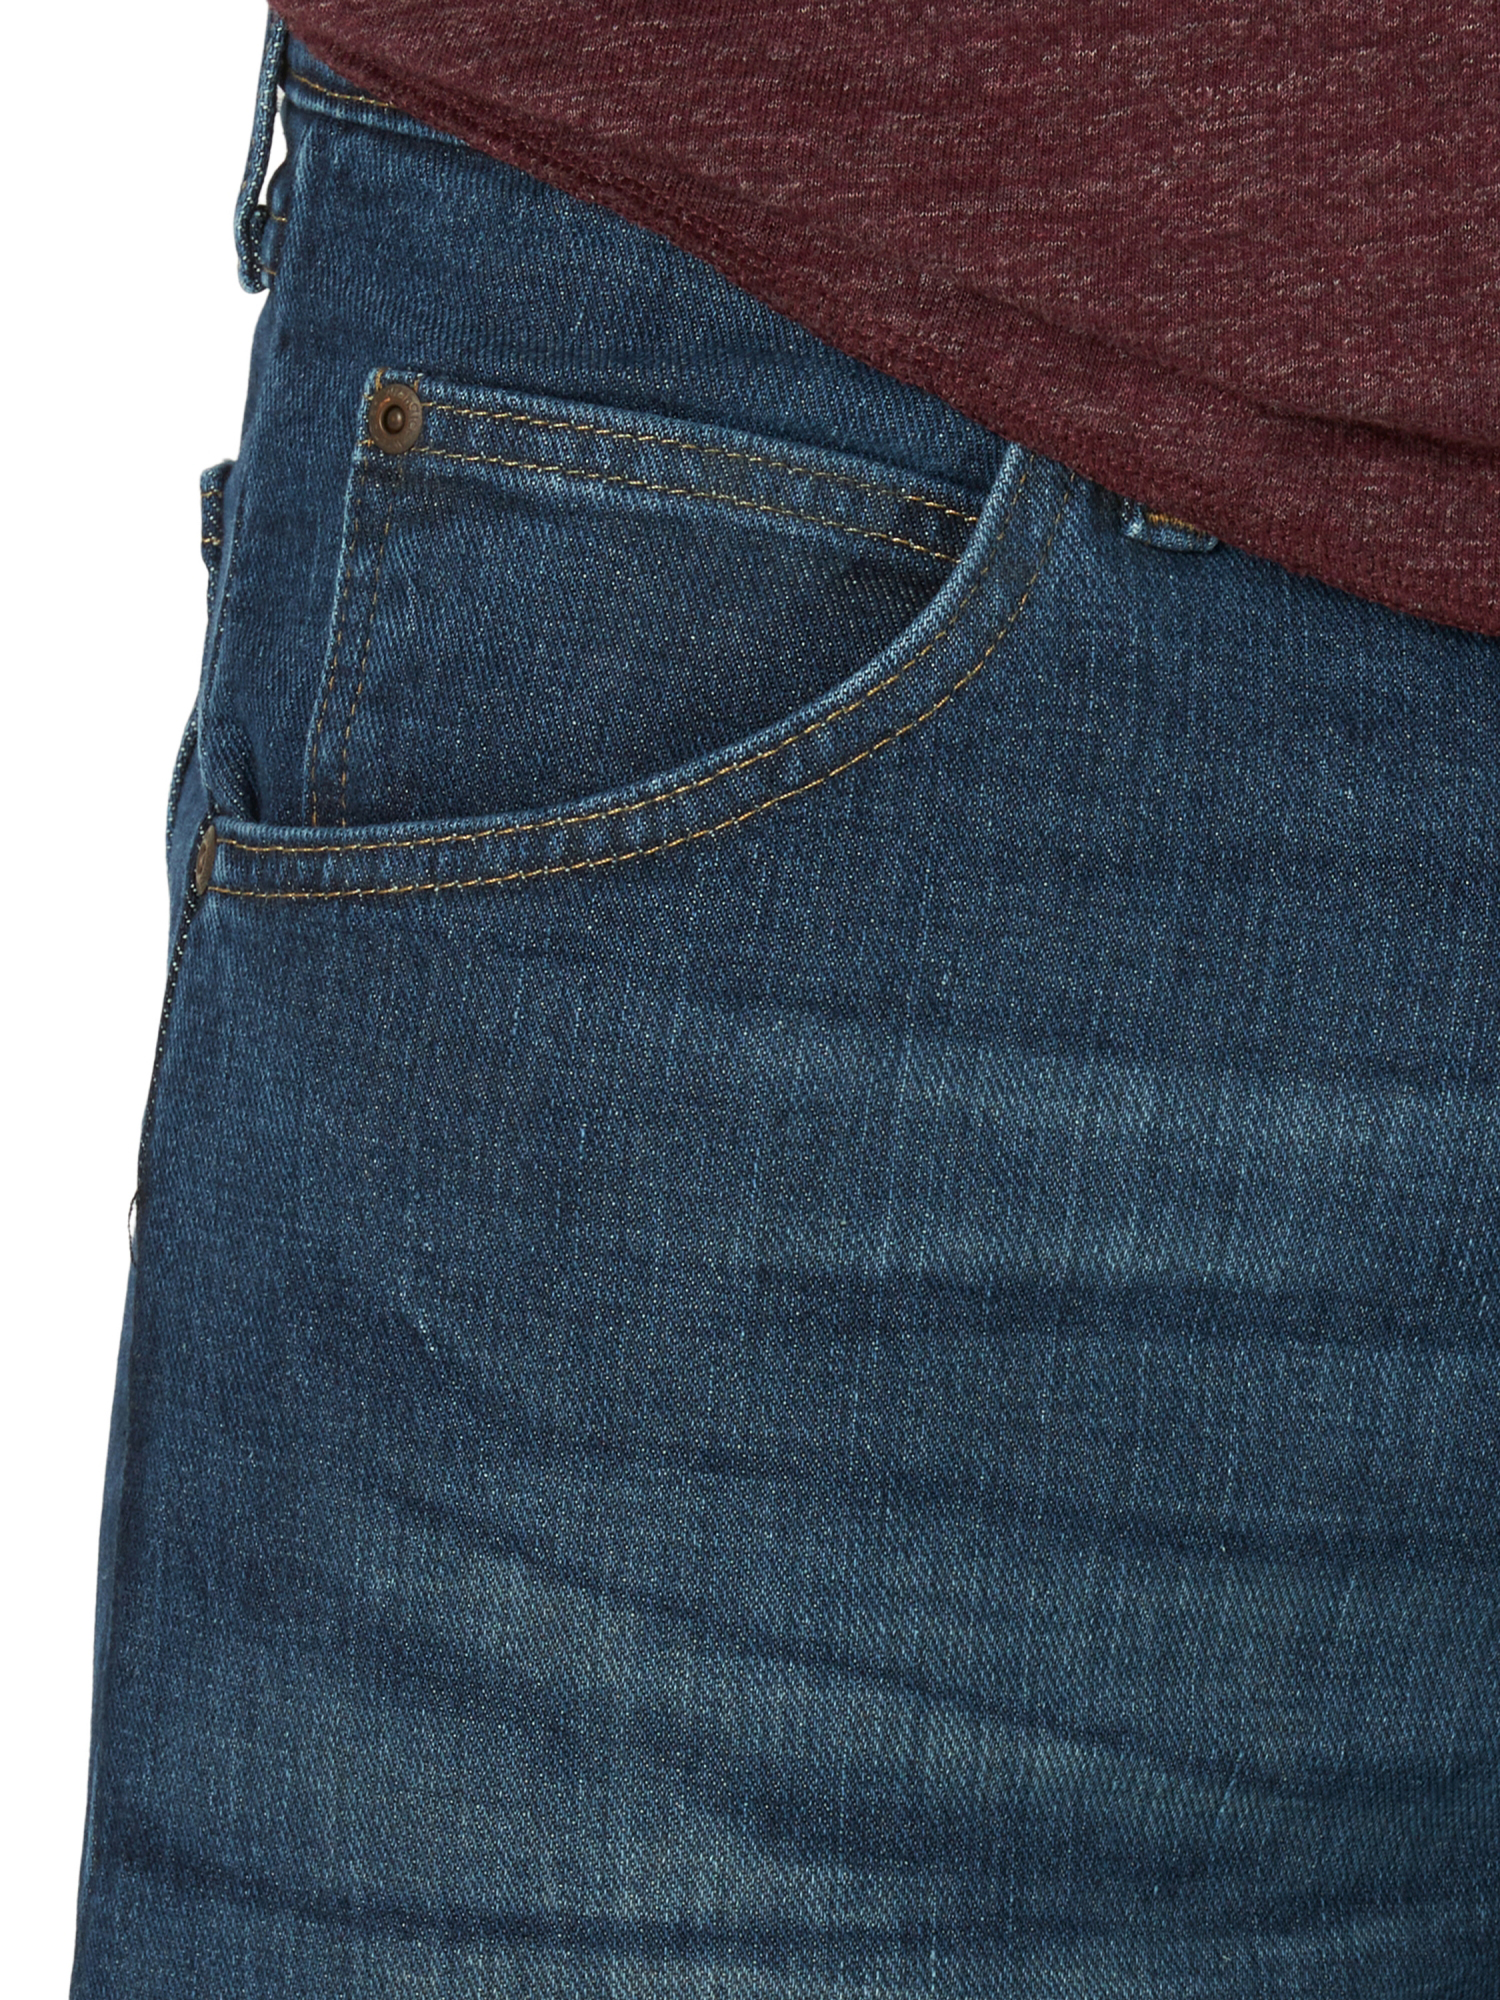 Wrangler Men's and Big Men's Relaxed Fit Jeans with Flex - image 5 of 8